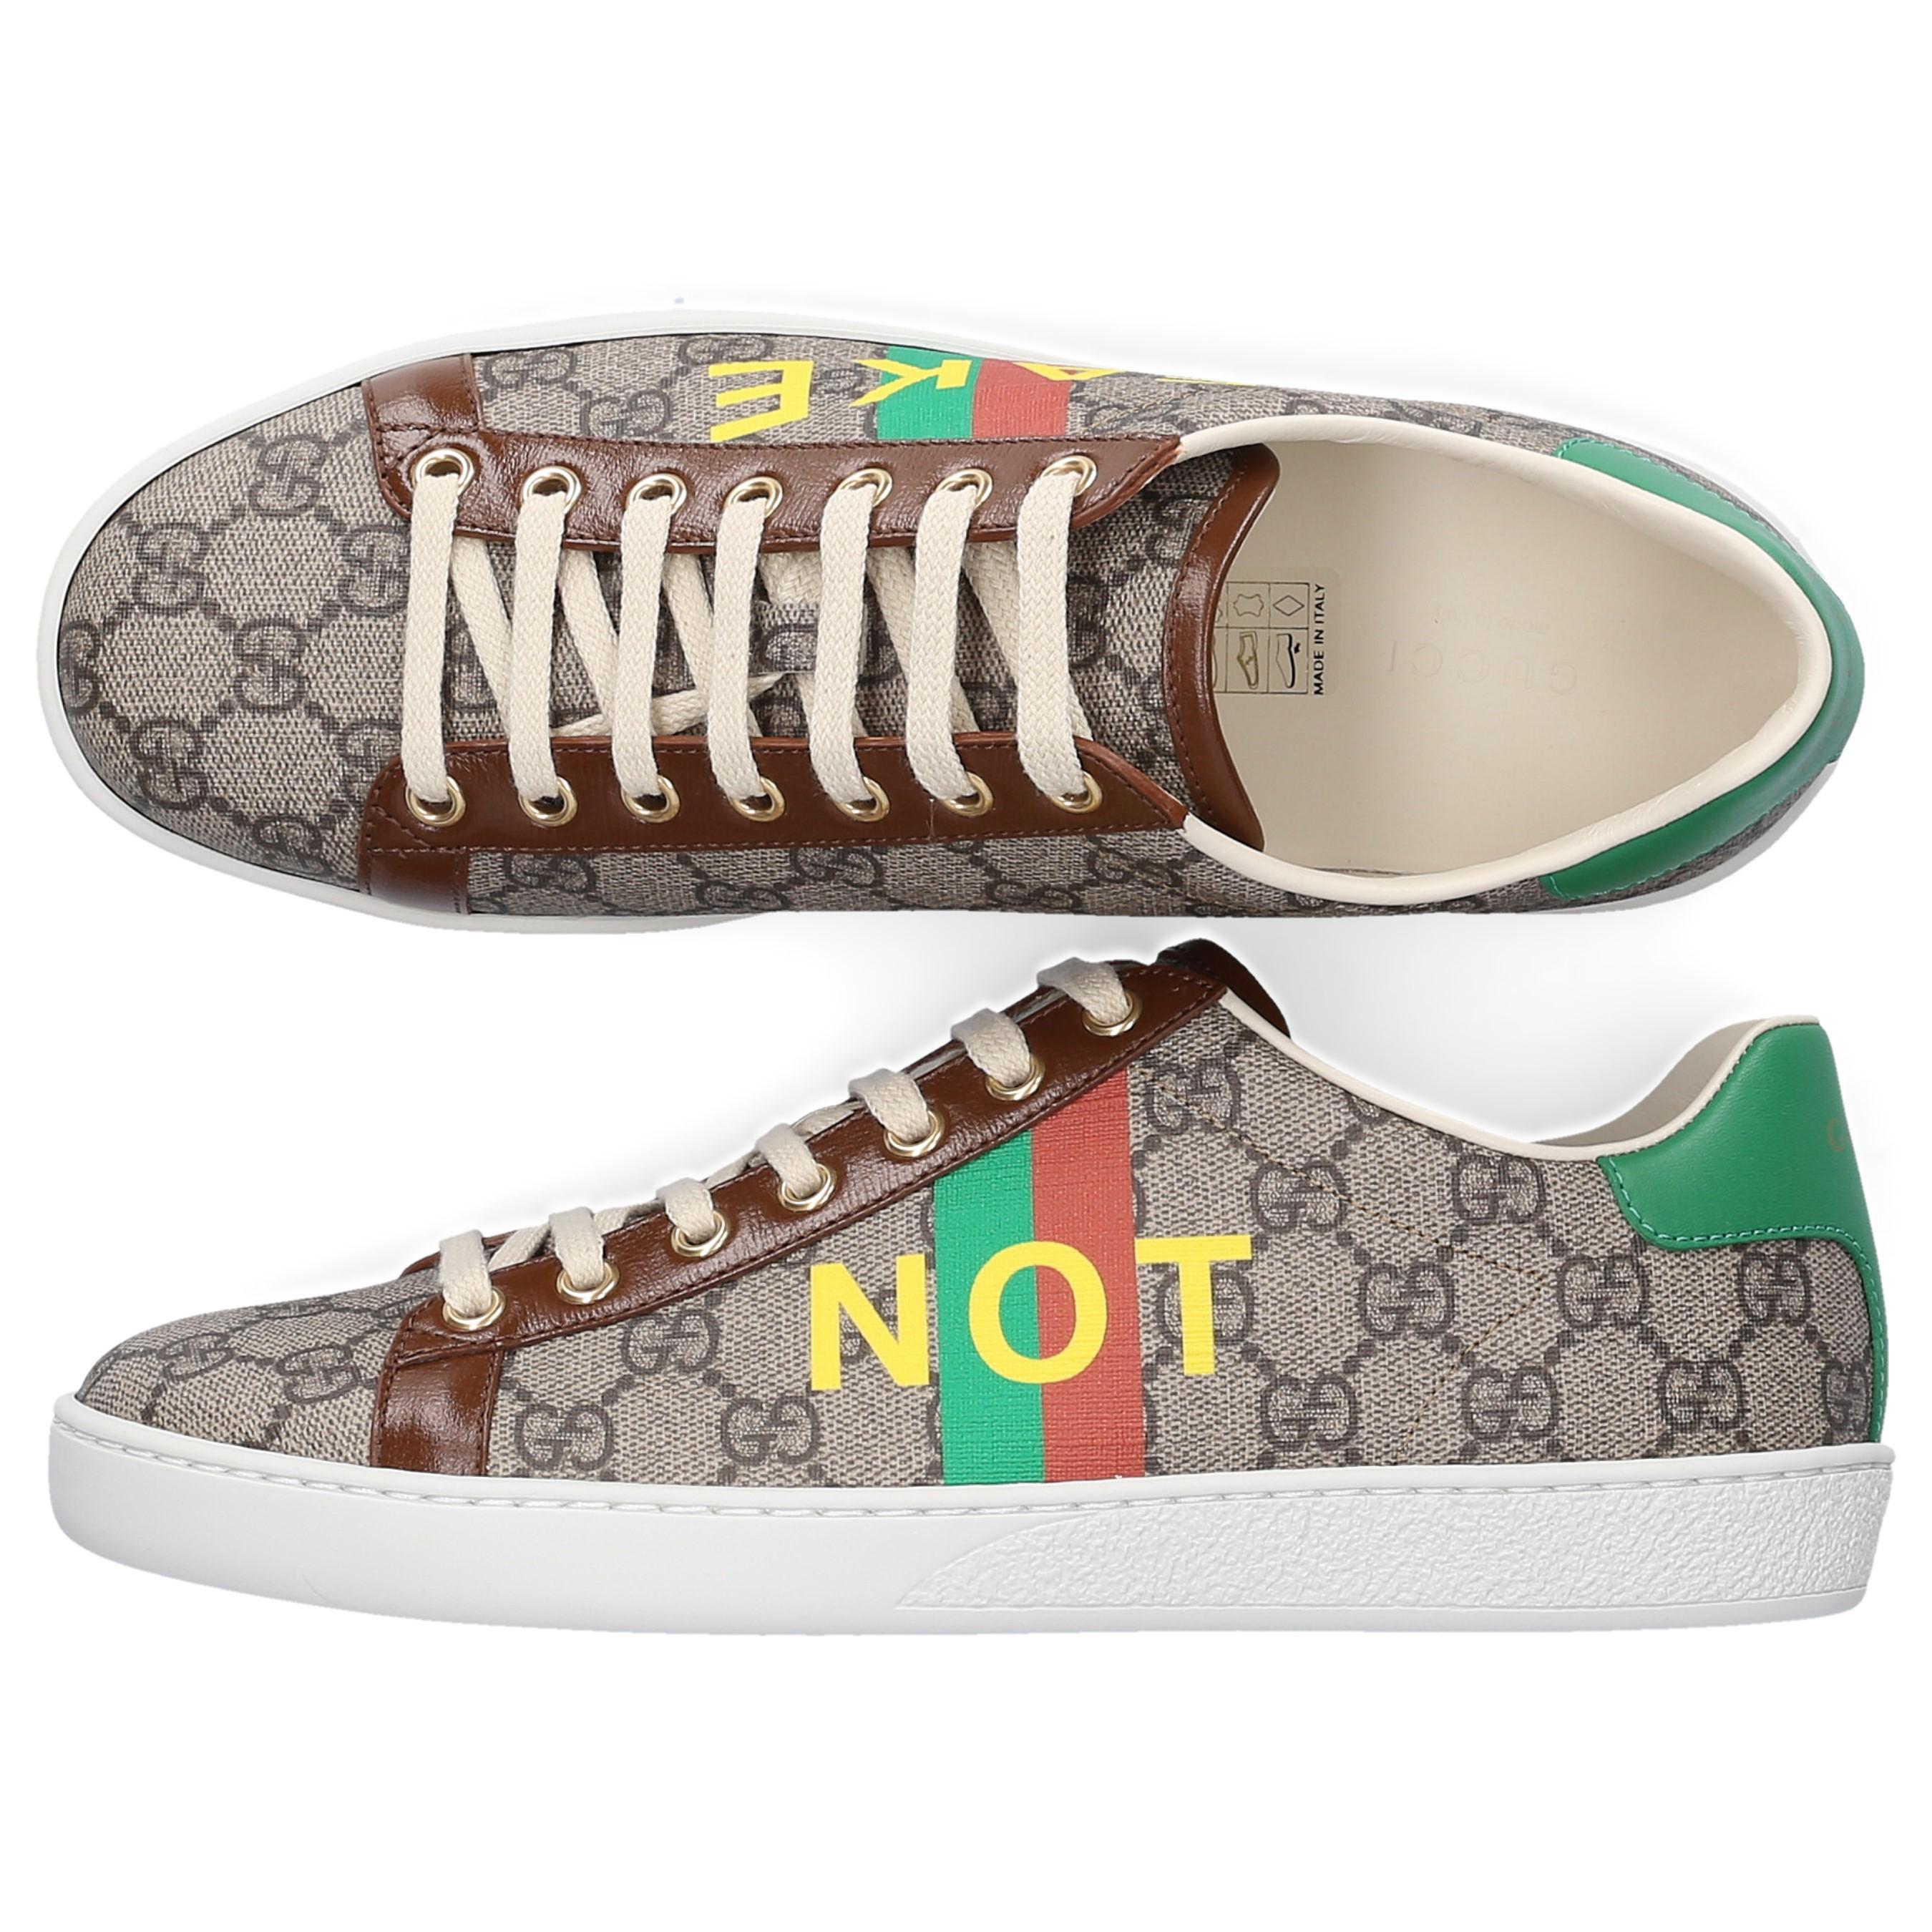 Gucci Canvas Print Ace Sneaker in Brown (Natural) - Save -